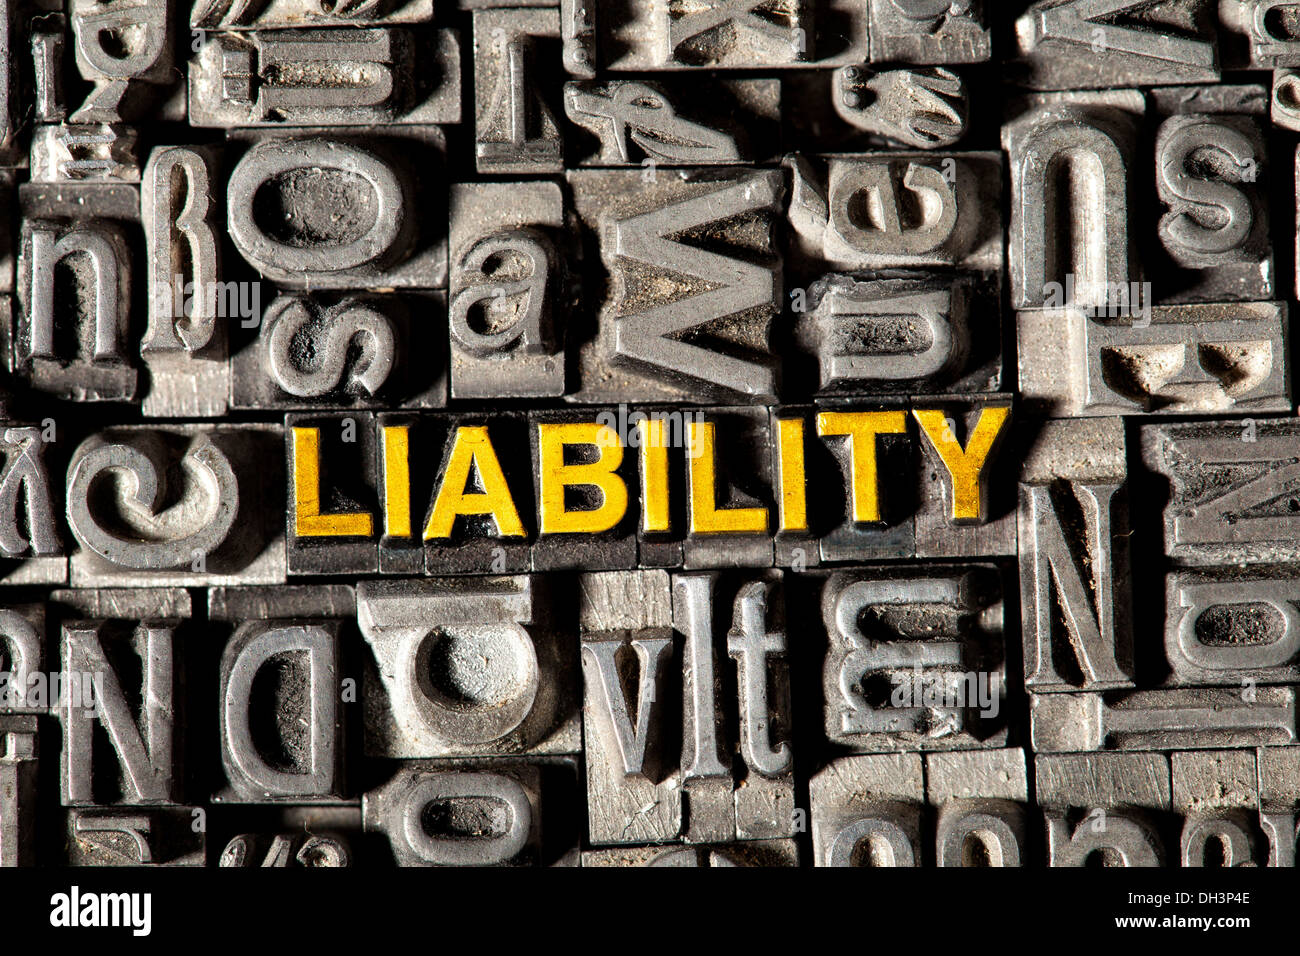 Old lead letters forming the word 'LIABILITY' Stock Photo